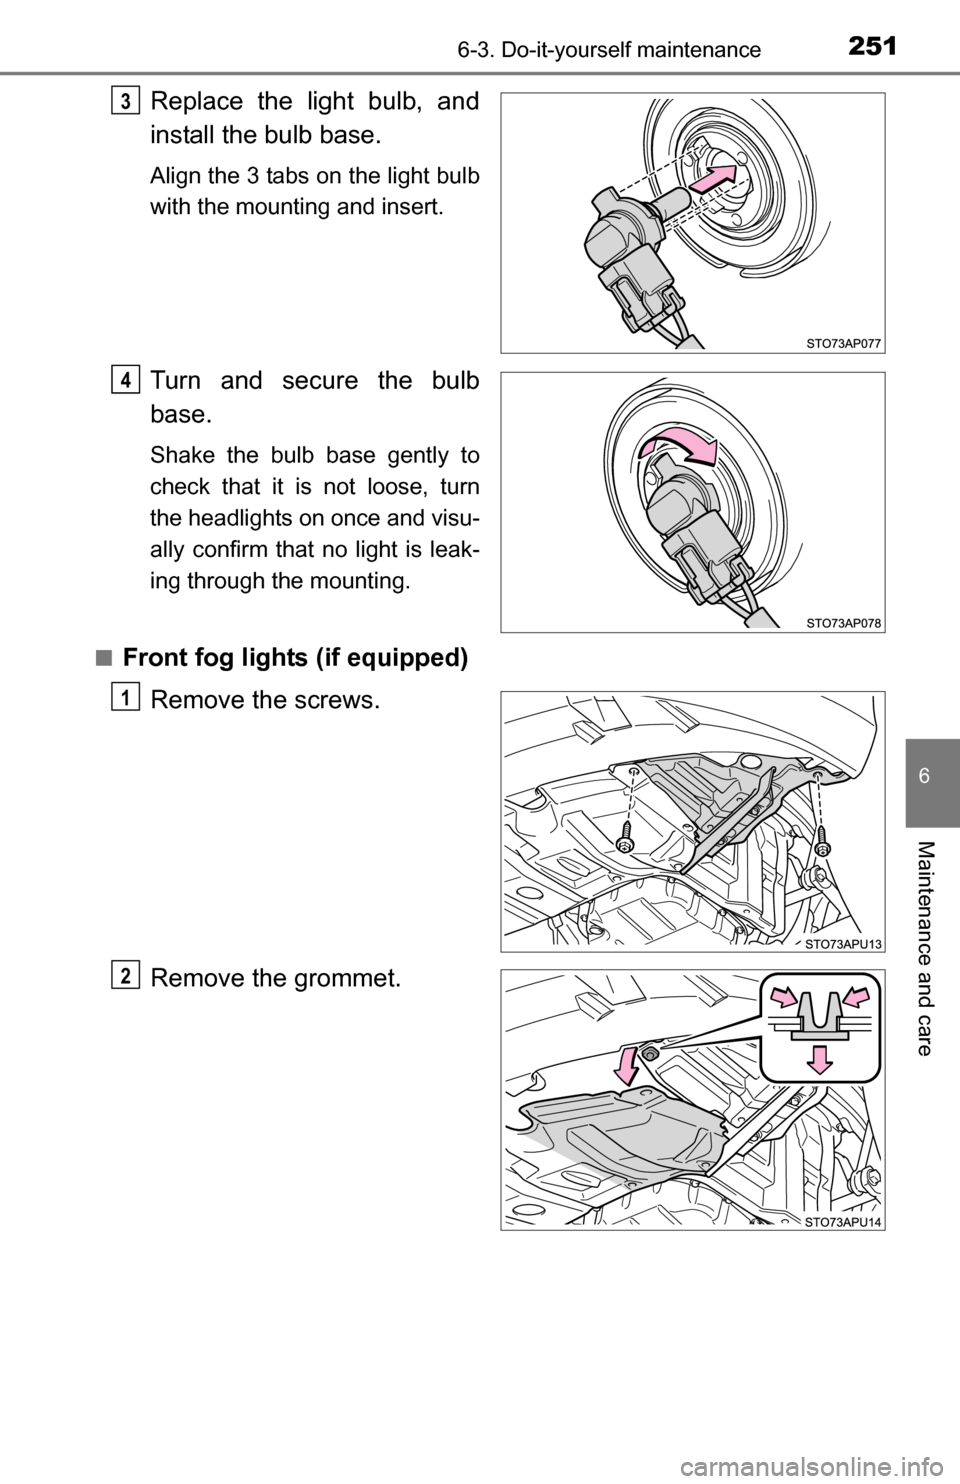 TOYOTA YARIS 2016 3.G Owners Manual 2516-3. Do-it-yourself maintenance
6
Maintenance and care
Replace the light bulb, and
install the bulb base.
Align the 3 tabs on the light bulb
with the mounting and insert.
Turn and secure the bulb
b